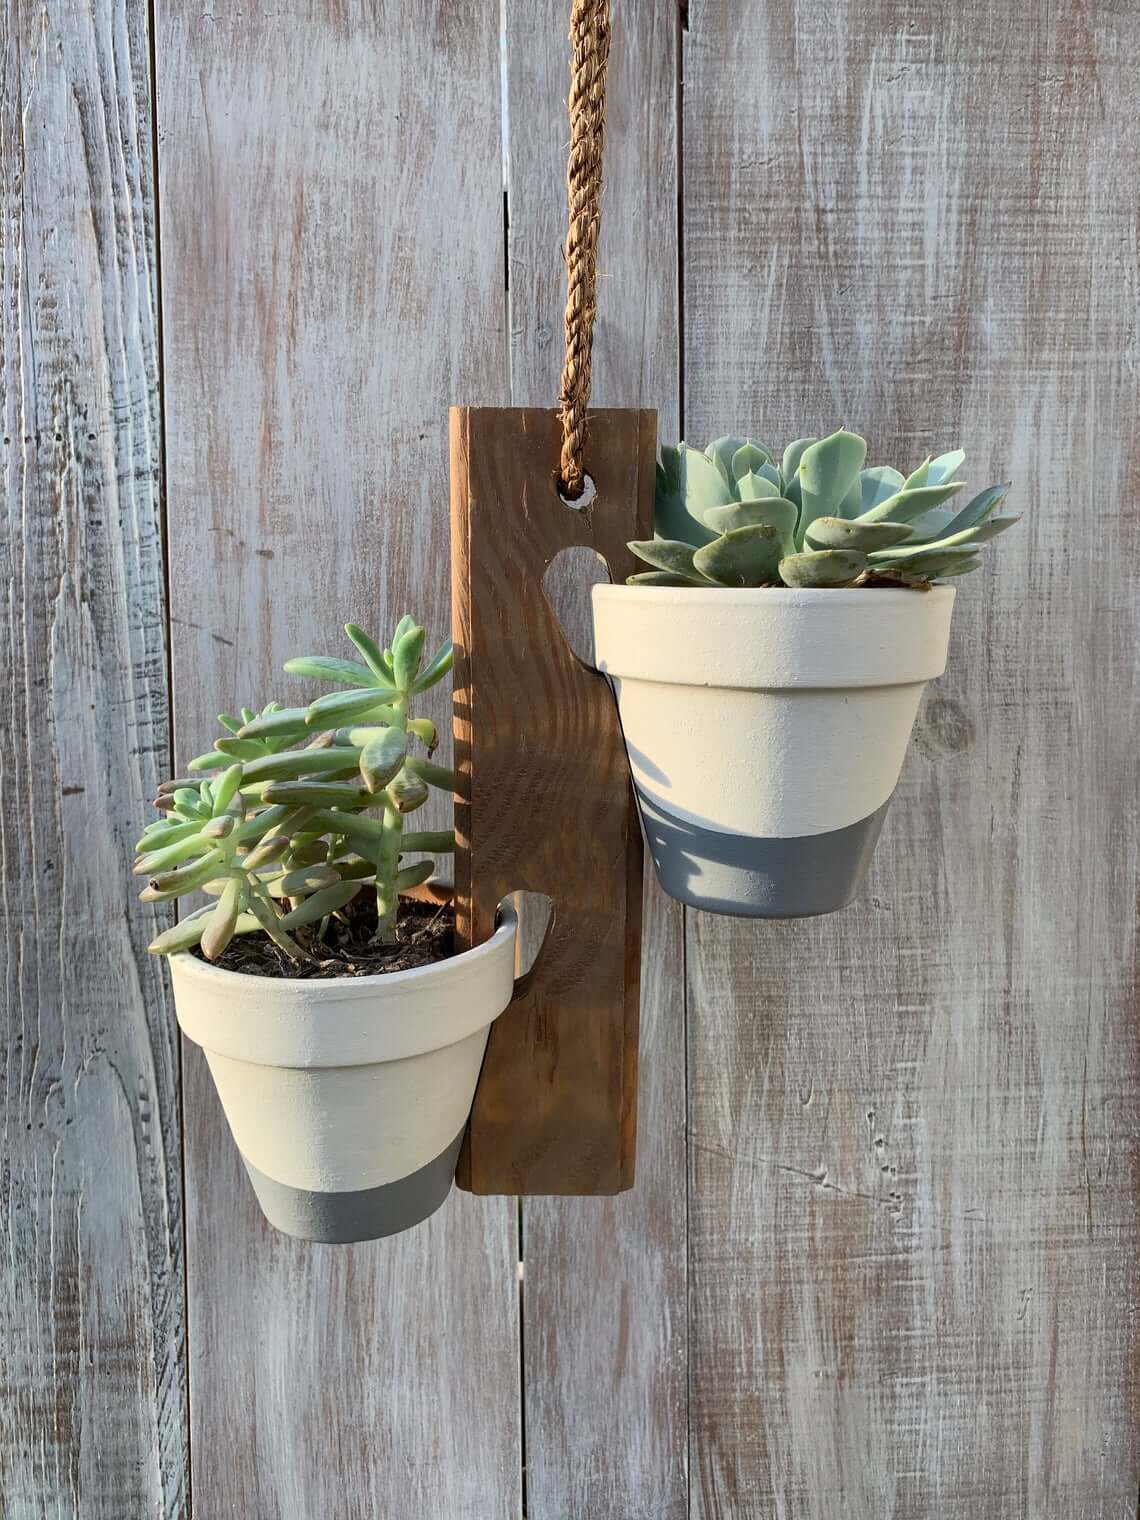 Wall Hanging Planter Triangle Pot Plant Holder-Home Decor Rustic Wood 